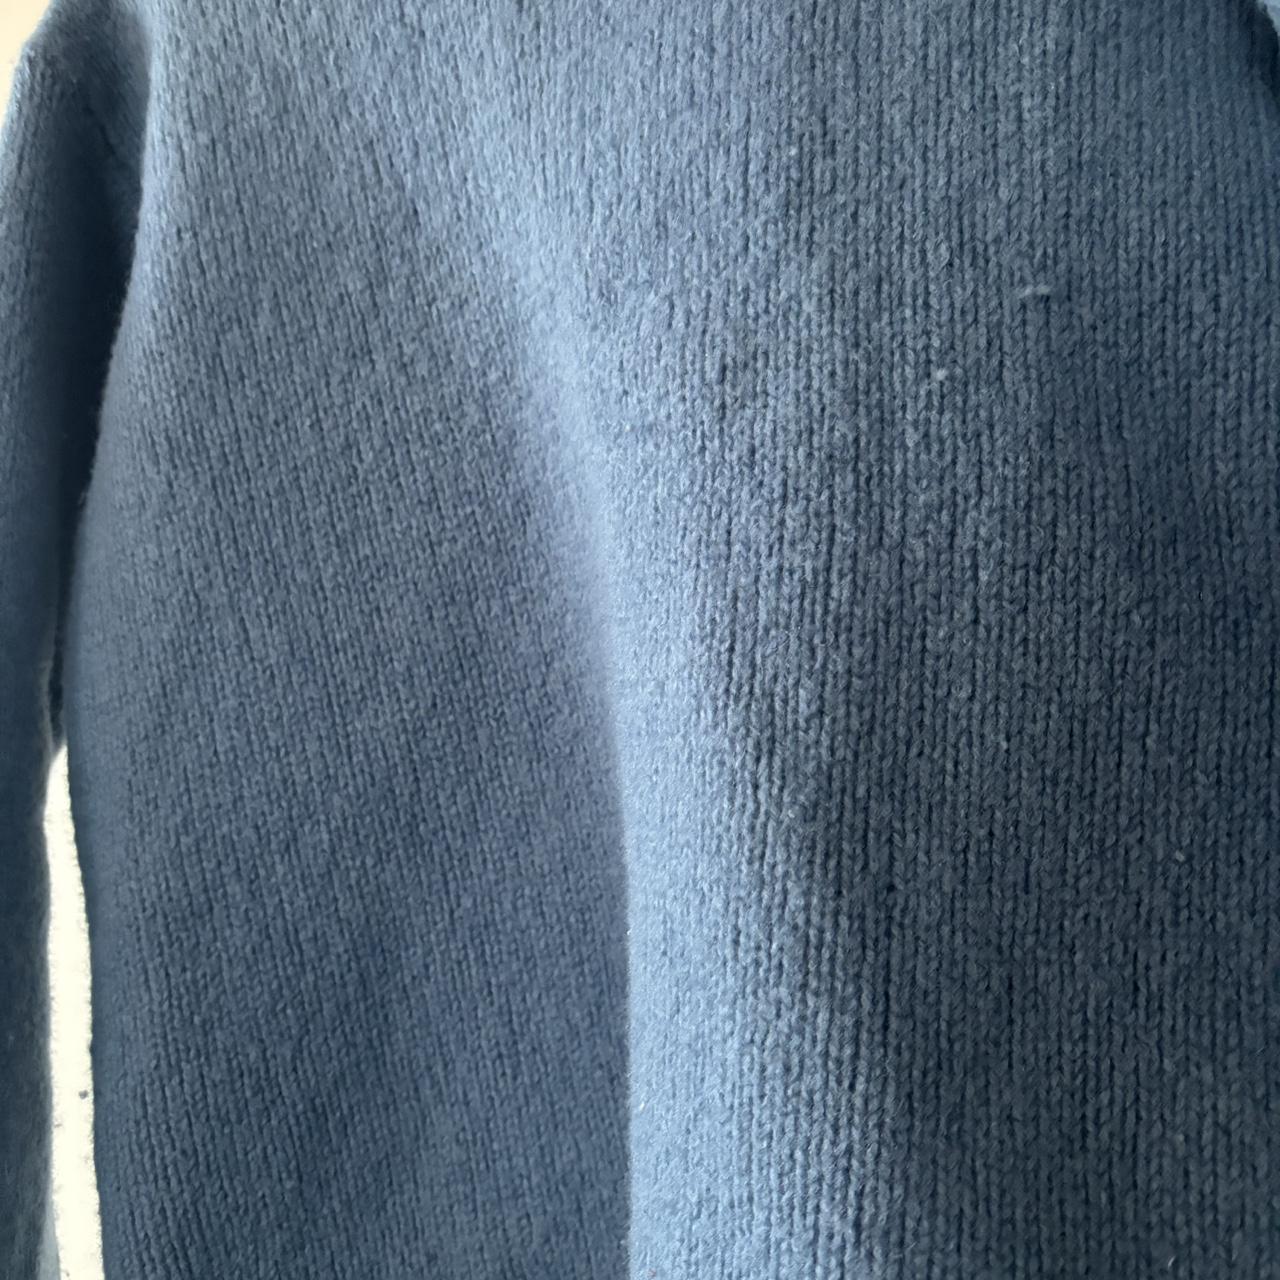 J crew large wool sweater, i think fits better for... - Depop